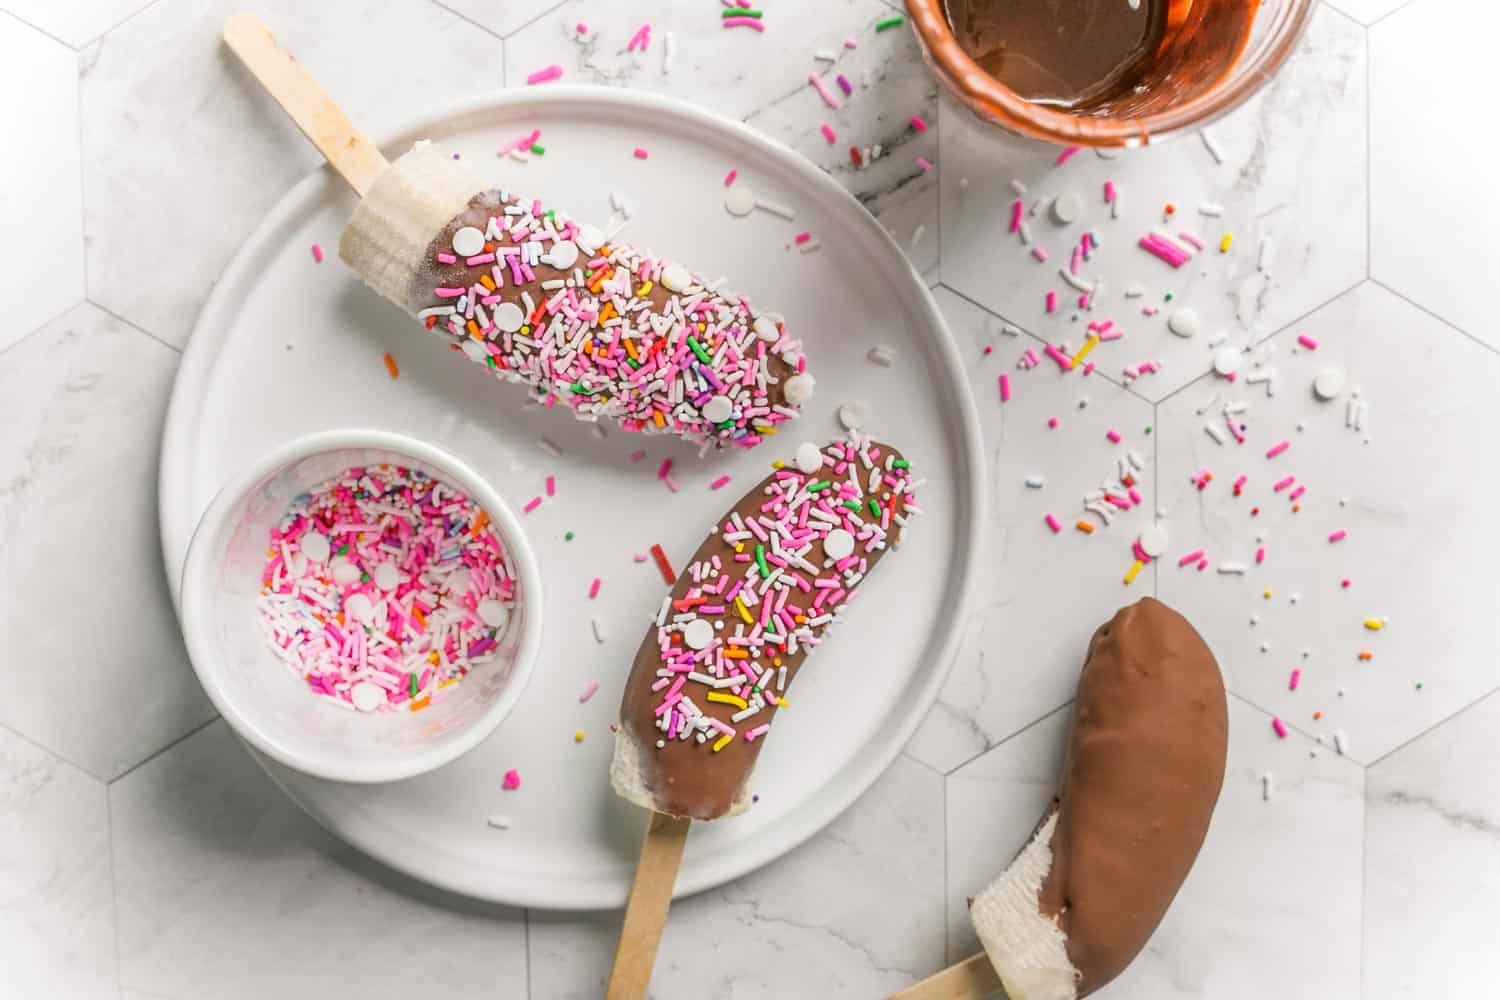 Banana Pops With Chocolate and Sprinkles